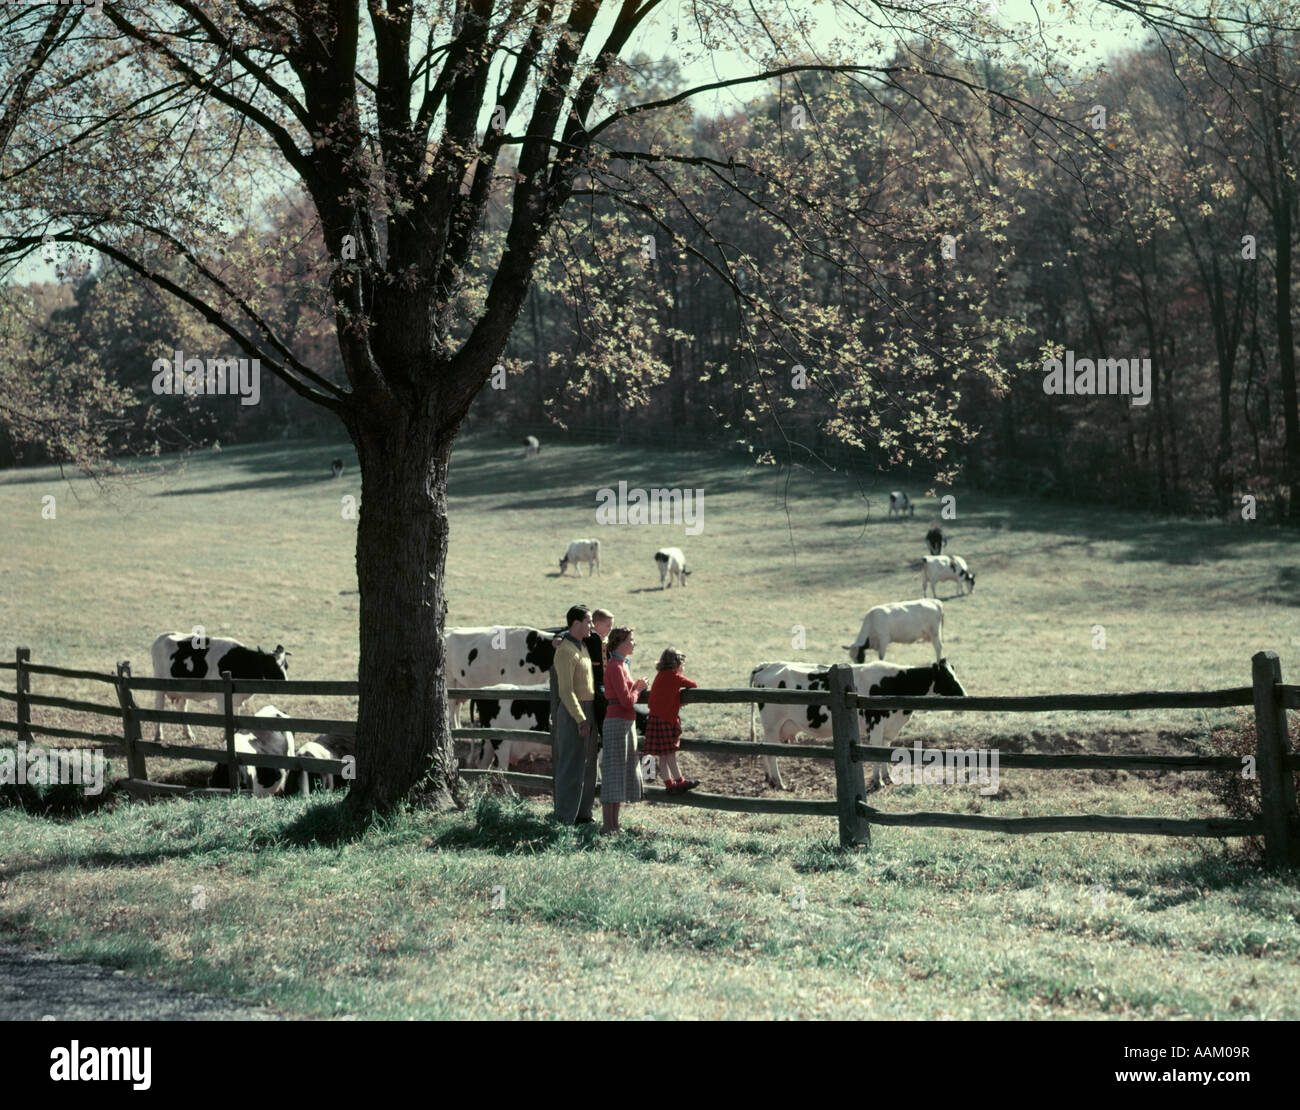 1950s FAMILY 4 BY PASTURE FENCE AUTUMN TREE HOLSTEIN DAIRY COWS IN FIELD GRAZING FARM LANDSCAPE SPLIT RAIL FENCE Stock Photo